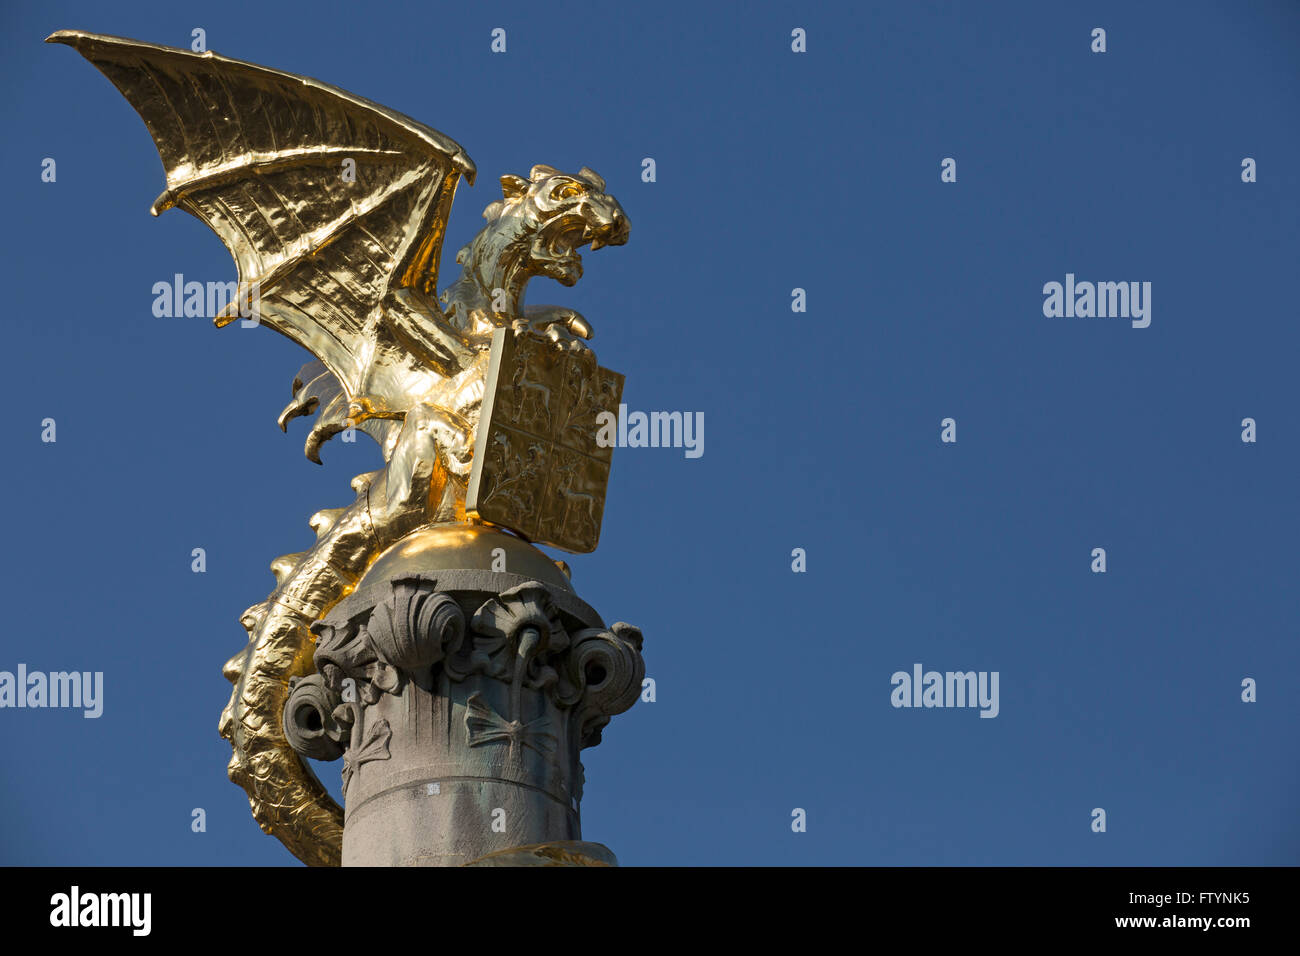 Golden Dragon statue in  's-Hertogenbosch, the Netherlands. The dragon (Draak Den Bosch) is the symbol of the city and sits on t Stock Photo